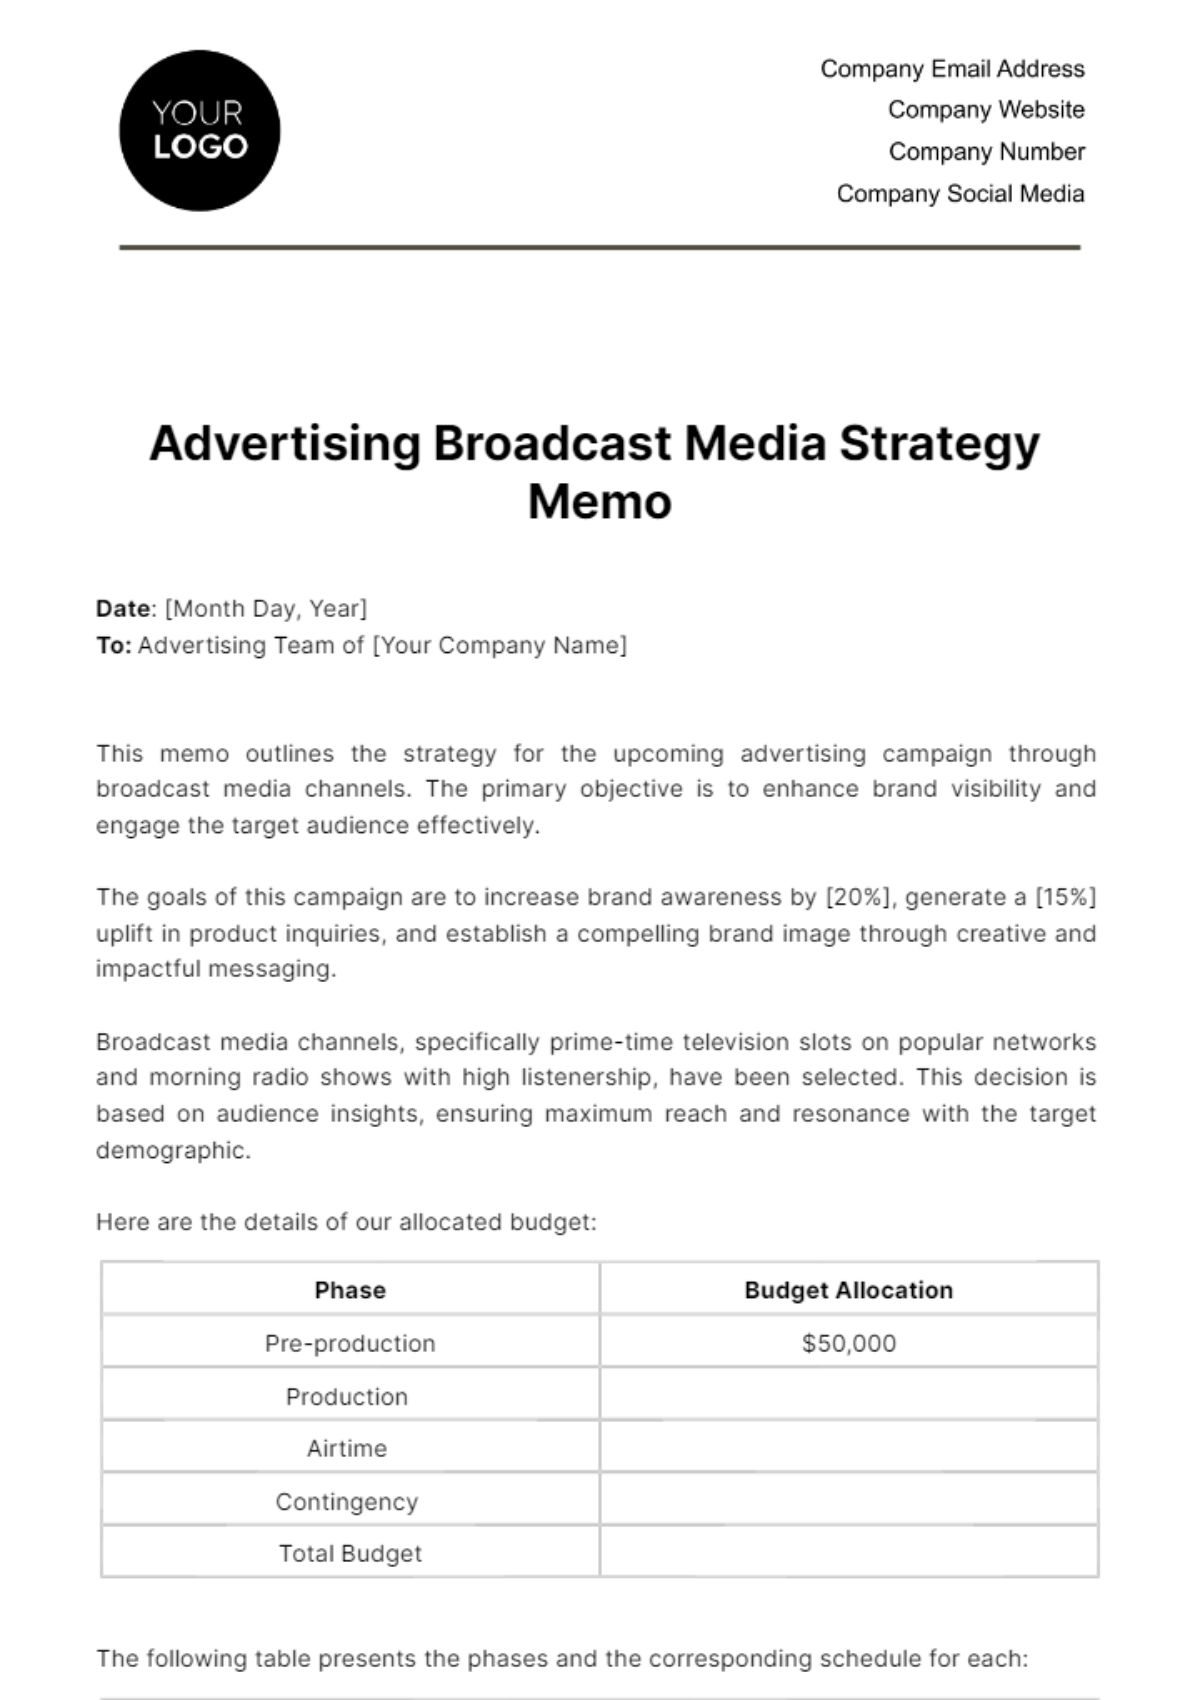 Advertising Broadcast Media Strategy Memo Template